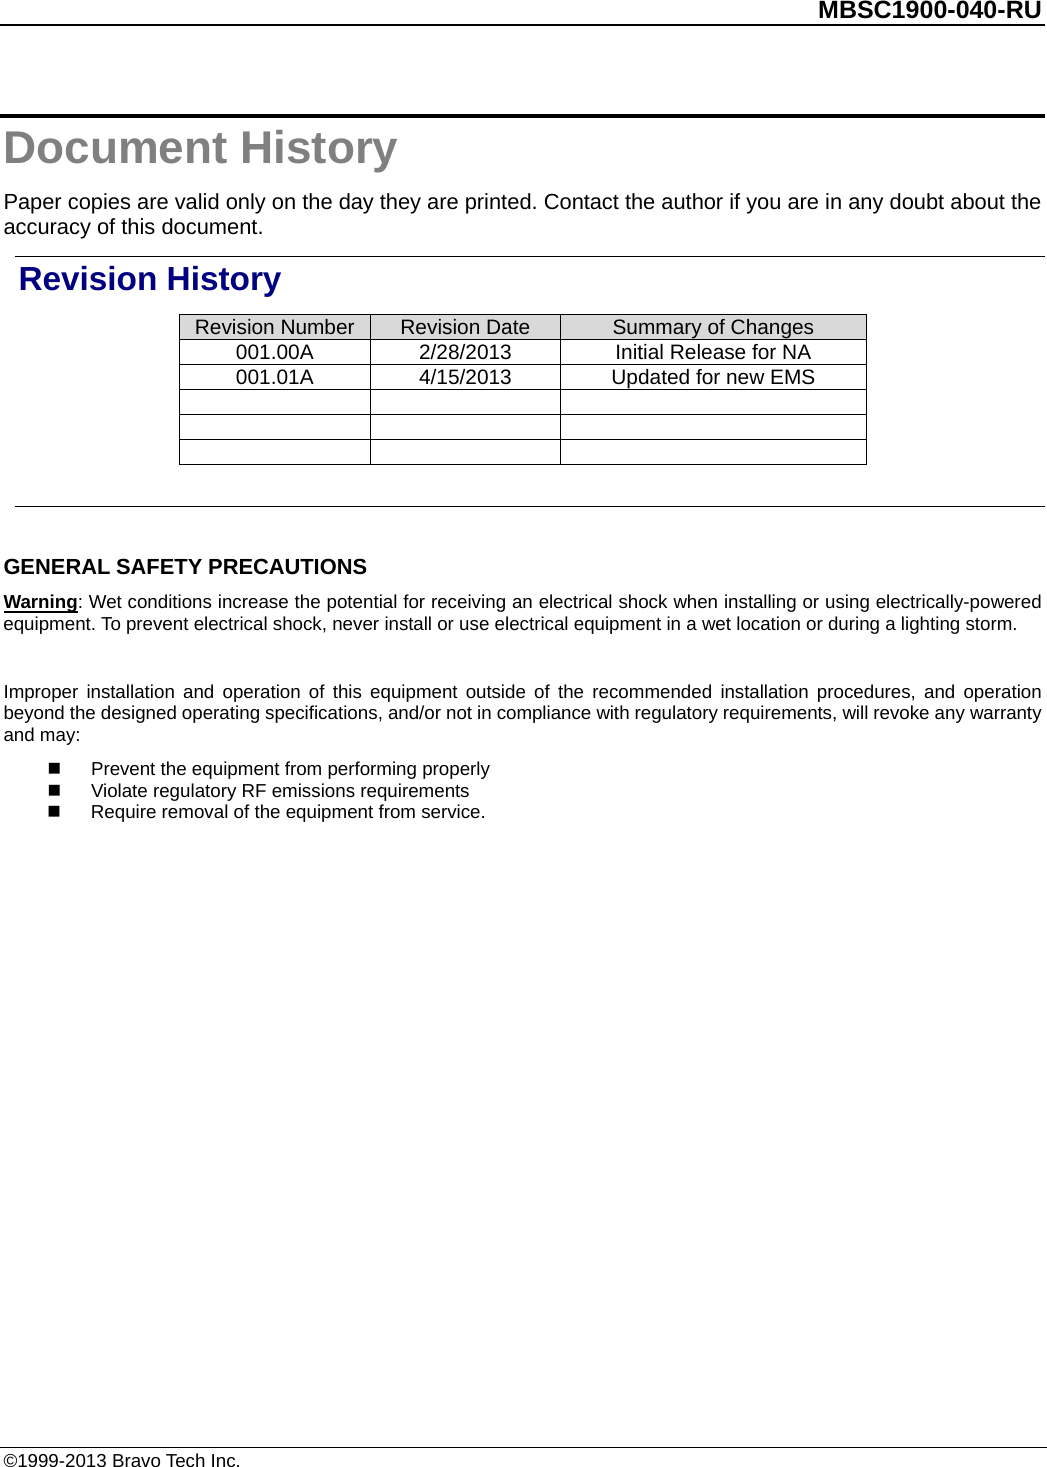          MBSC1900-040-RU   Document History Paper copies are valid only on the day they are printed. Contact the author if you are in any doubt about the accuracy of this document. Revision History Revision Number Revision Date Summary of Changes 001.00A 2/28/2013 Initial Release for NA   001.01A 4/15/2013 Updated for new EMS              GENERAL SAFETY PRECAUTIONS Warning: Wet conditions increase the potential for receiving an electrical shock when installing or using electrically-powered equipment. To prevent electrical shock, never install or use electrical equipment in a wet location or during a lighting storm.  Improper installation and operation of this equipment outside of the recommended installation procedures, and operation beyond the designed operating specifications, and/or not in compliance with regulatory requirements, will revoke any warranty and may:  Prevent the equipment from performing properly  Violate regulatory RF emissions requirements  Require removal of the equipment from service.  ©1999-2013 Bravo Tech Inc. 